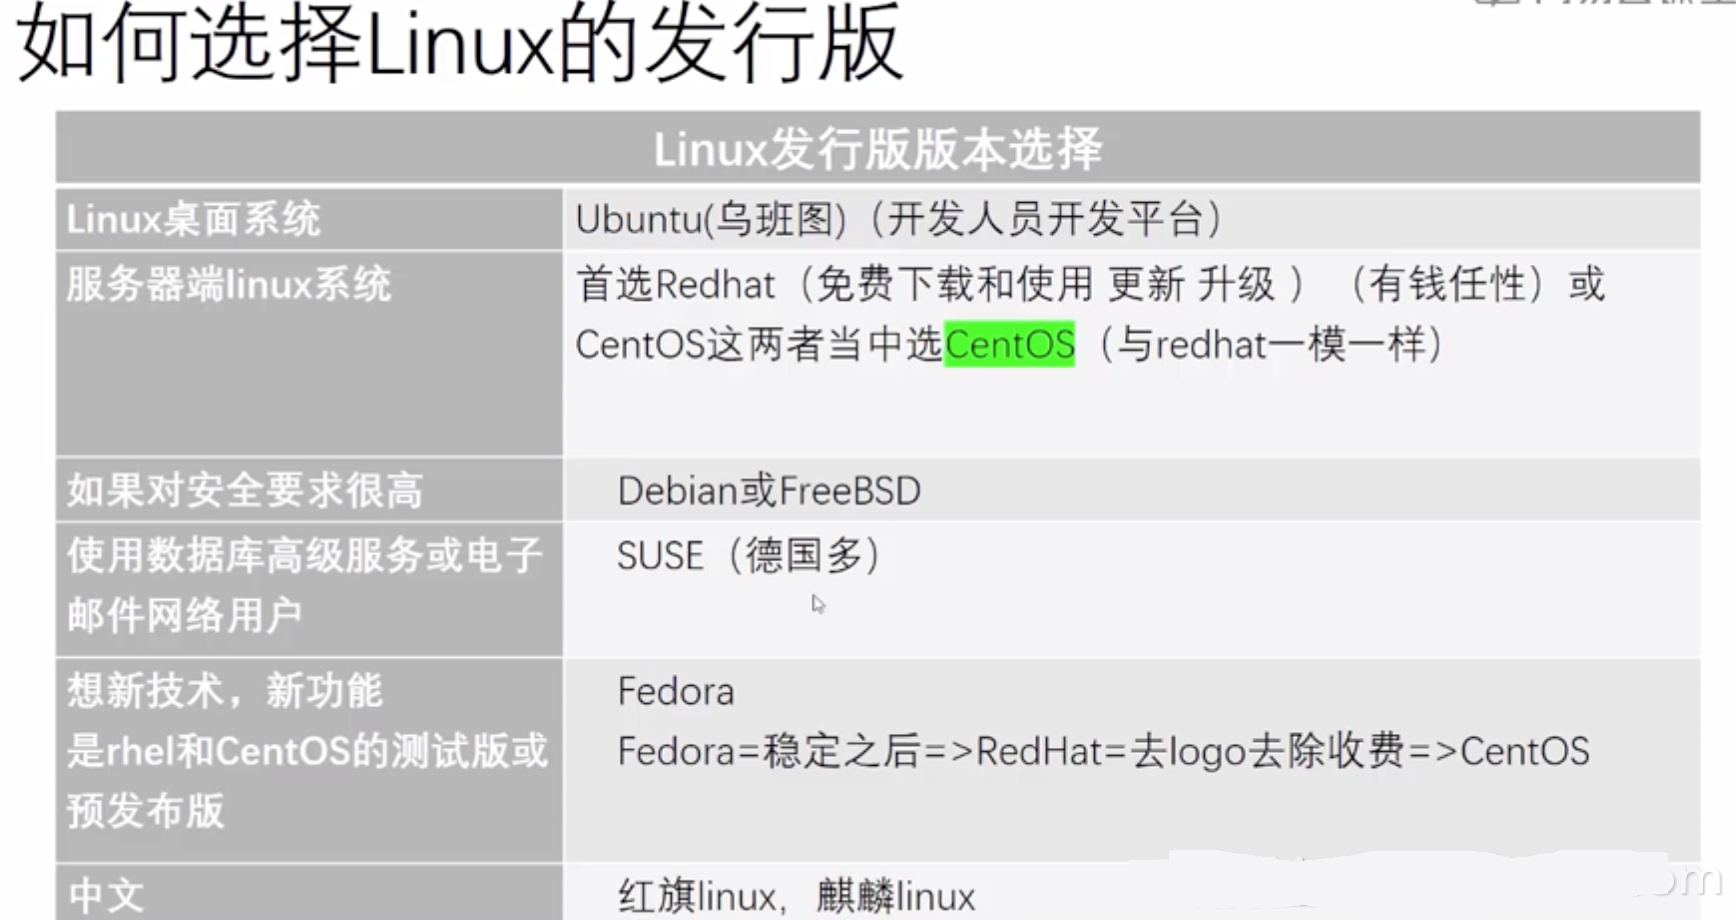 Linux 学习基础入门之Linux发展史Linux 学习基础入门之Linux发展史